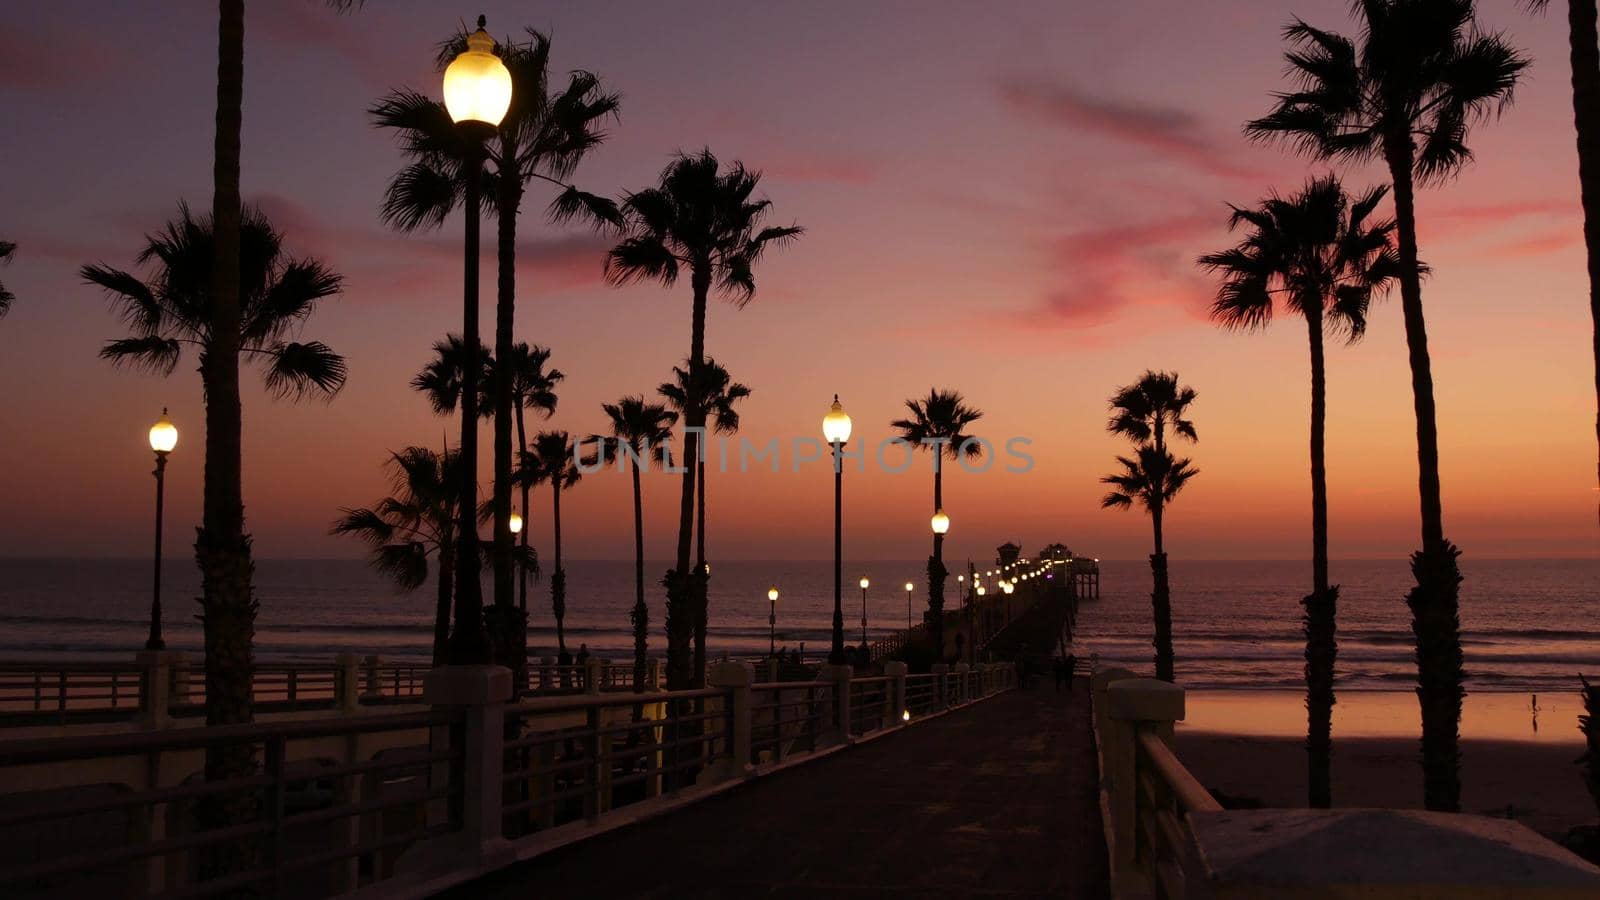 Palms and twilight sky in California USA. Tropical ocean beach sunset atmosphere. Los Angeles vibes. by DogoraSun